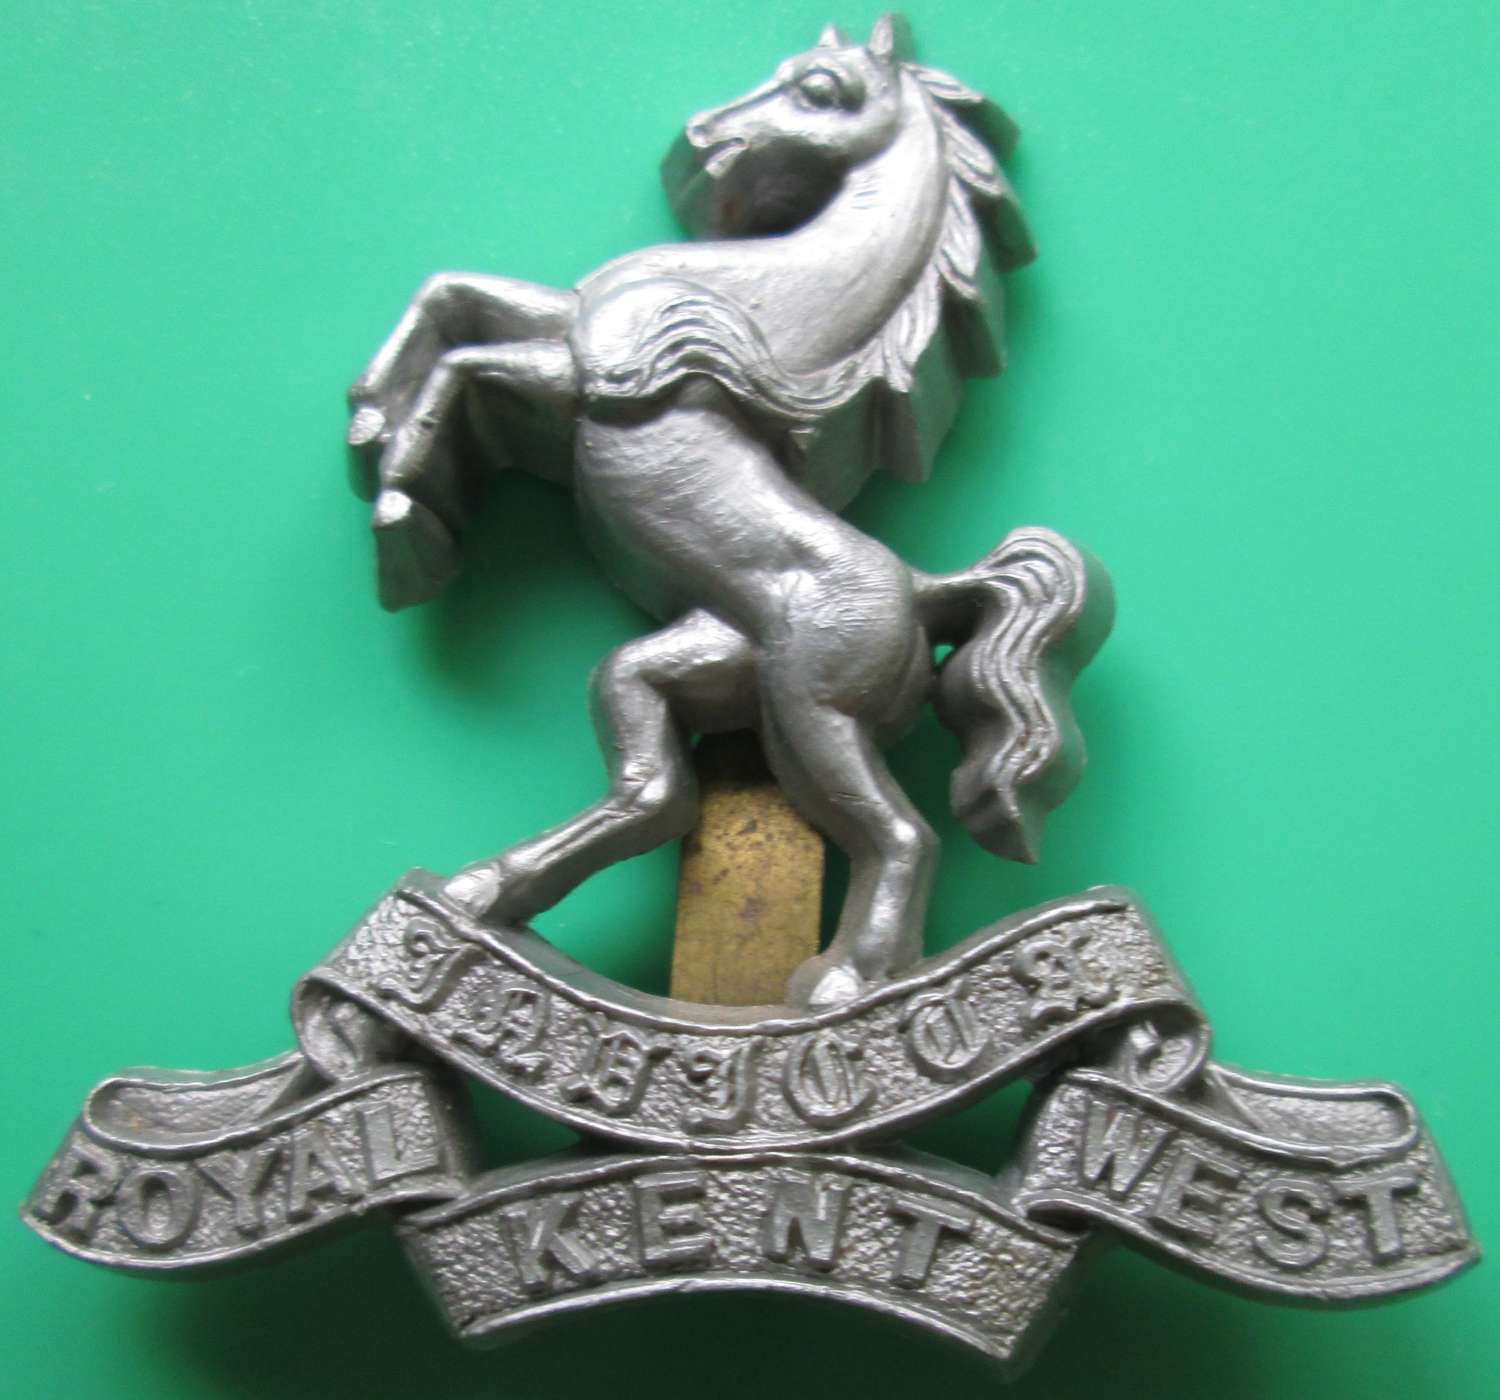 A WWII PERIOD ROYAL WEST KENT PLASTIC ECONOMY CAP BADGE